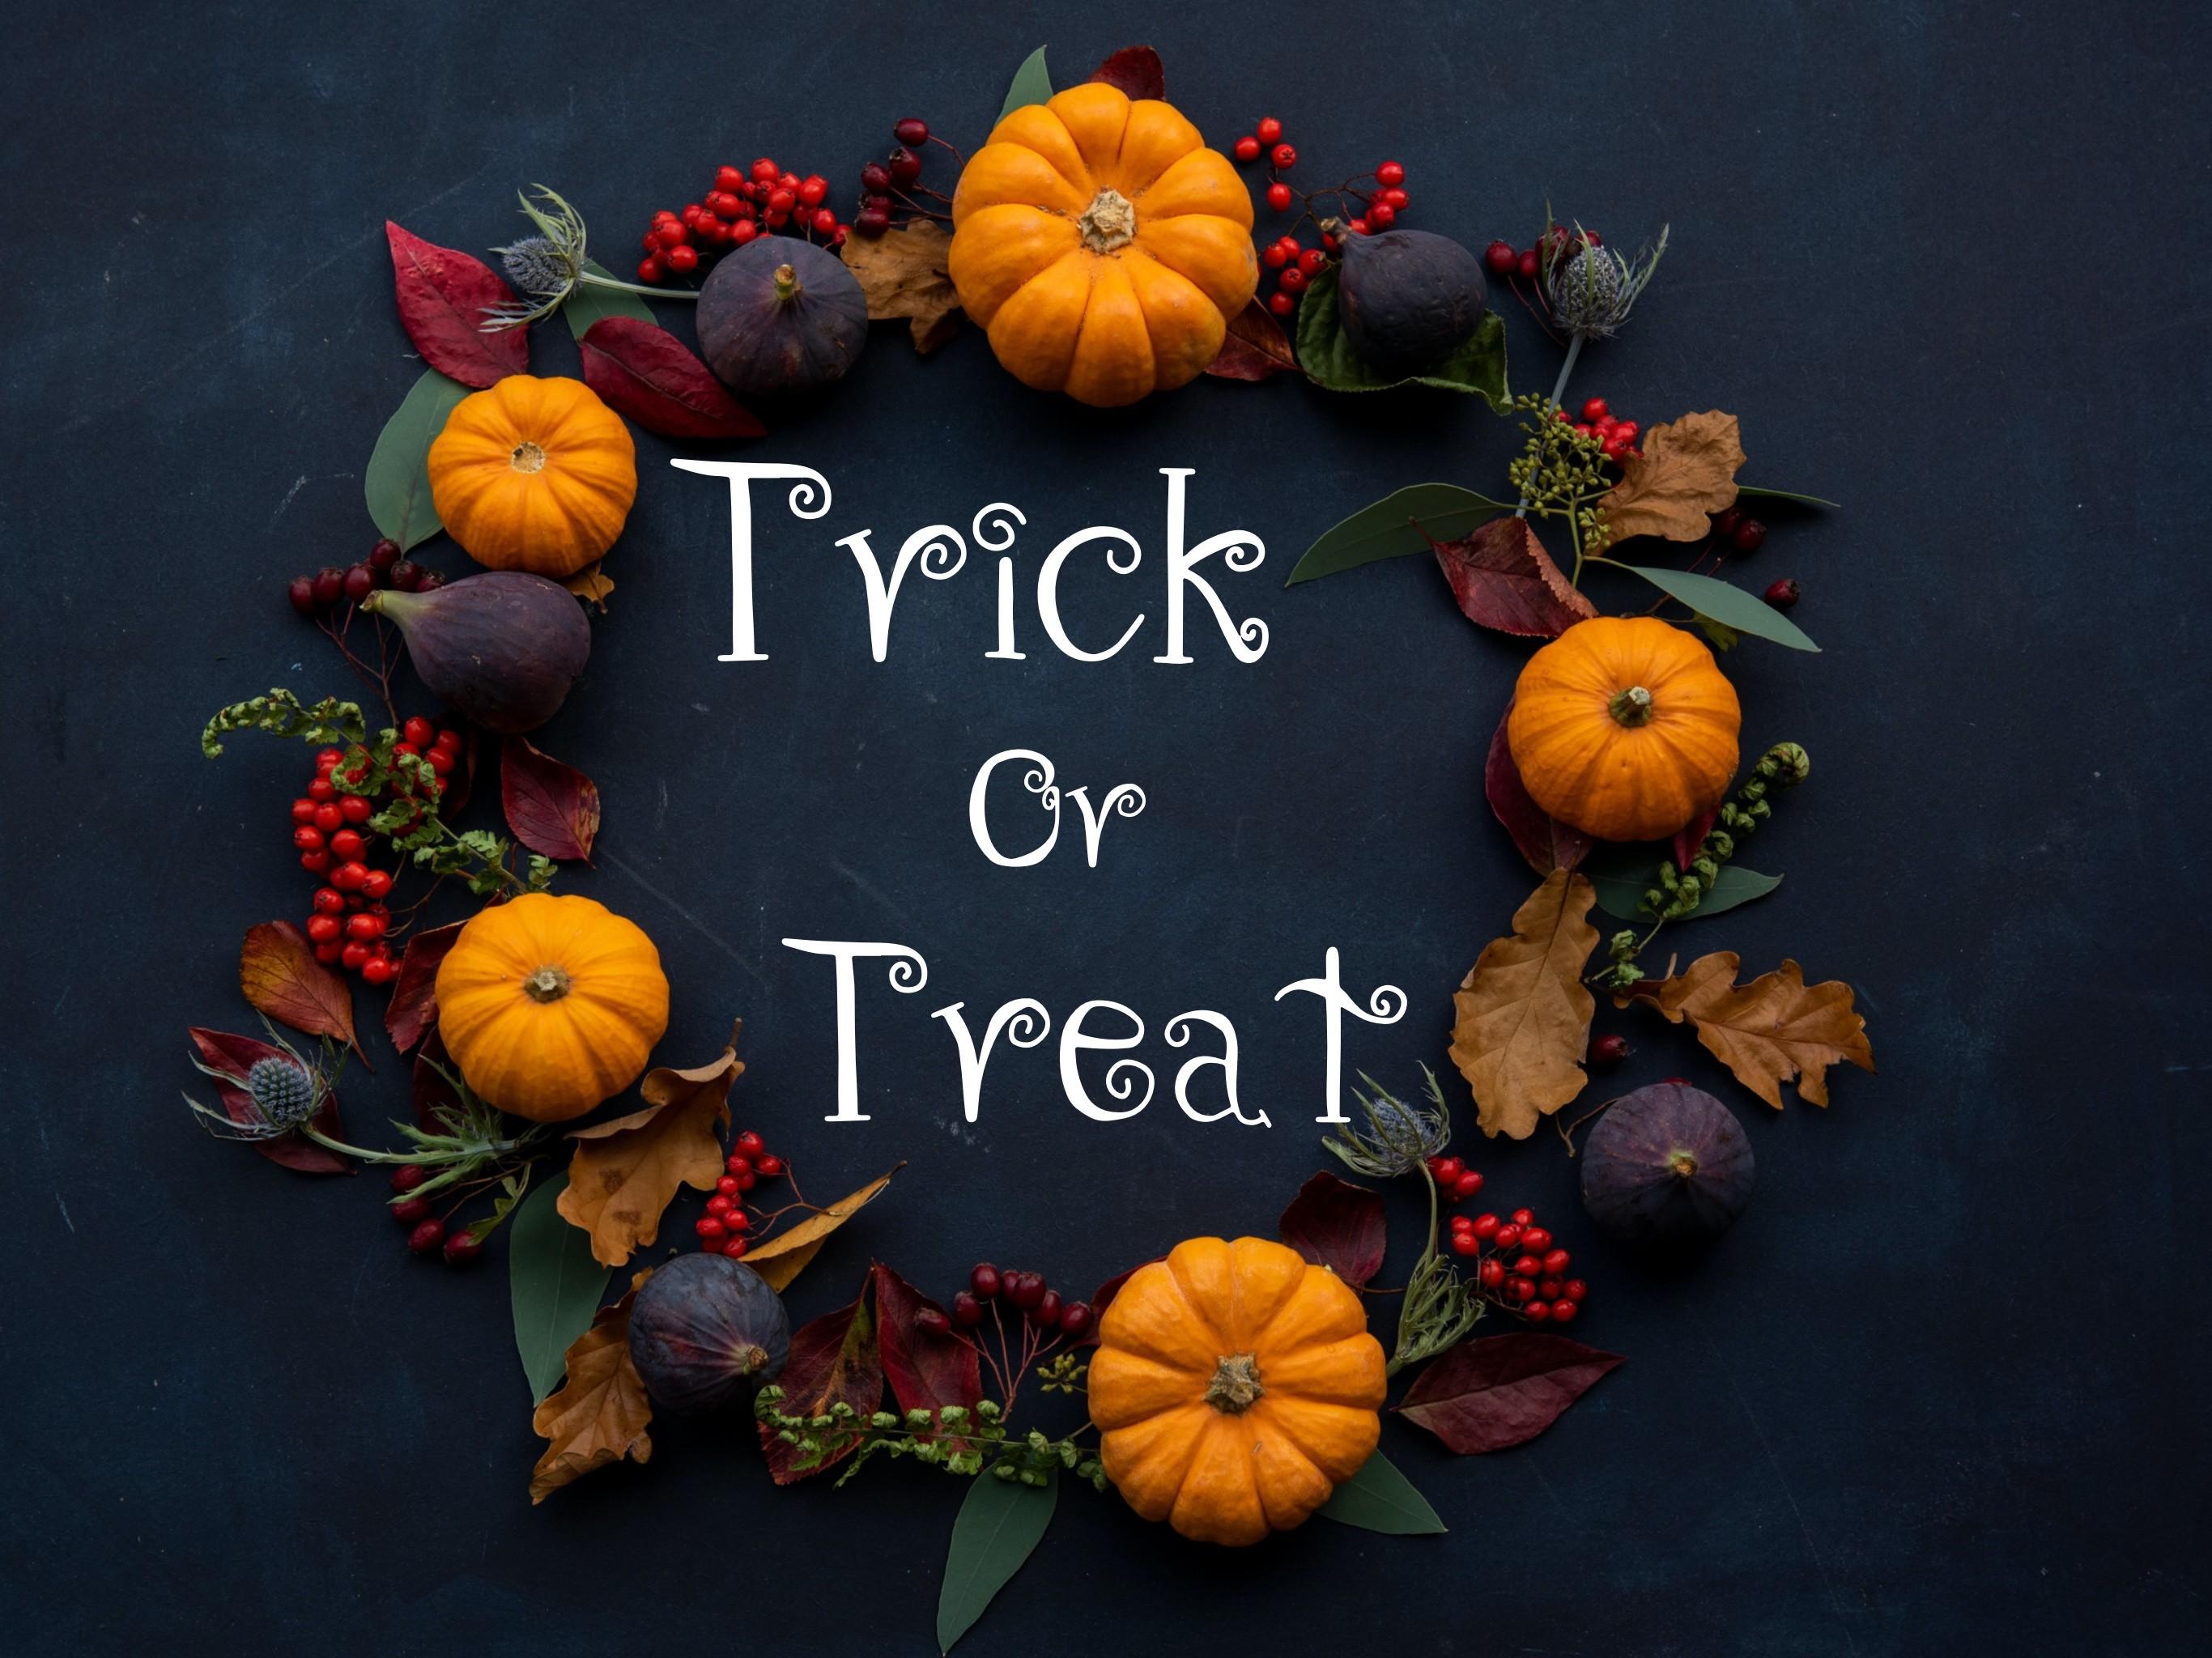 Trick or Treat Font